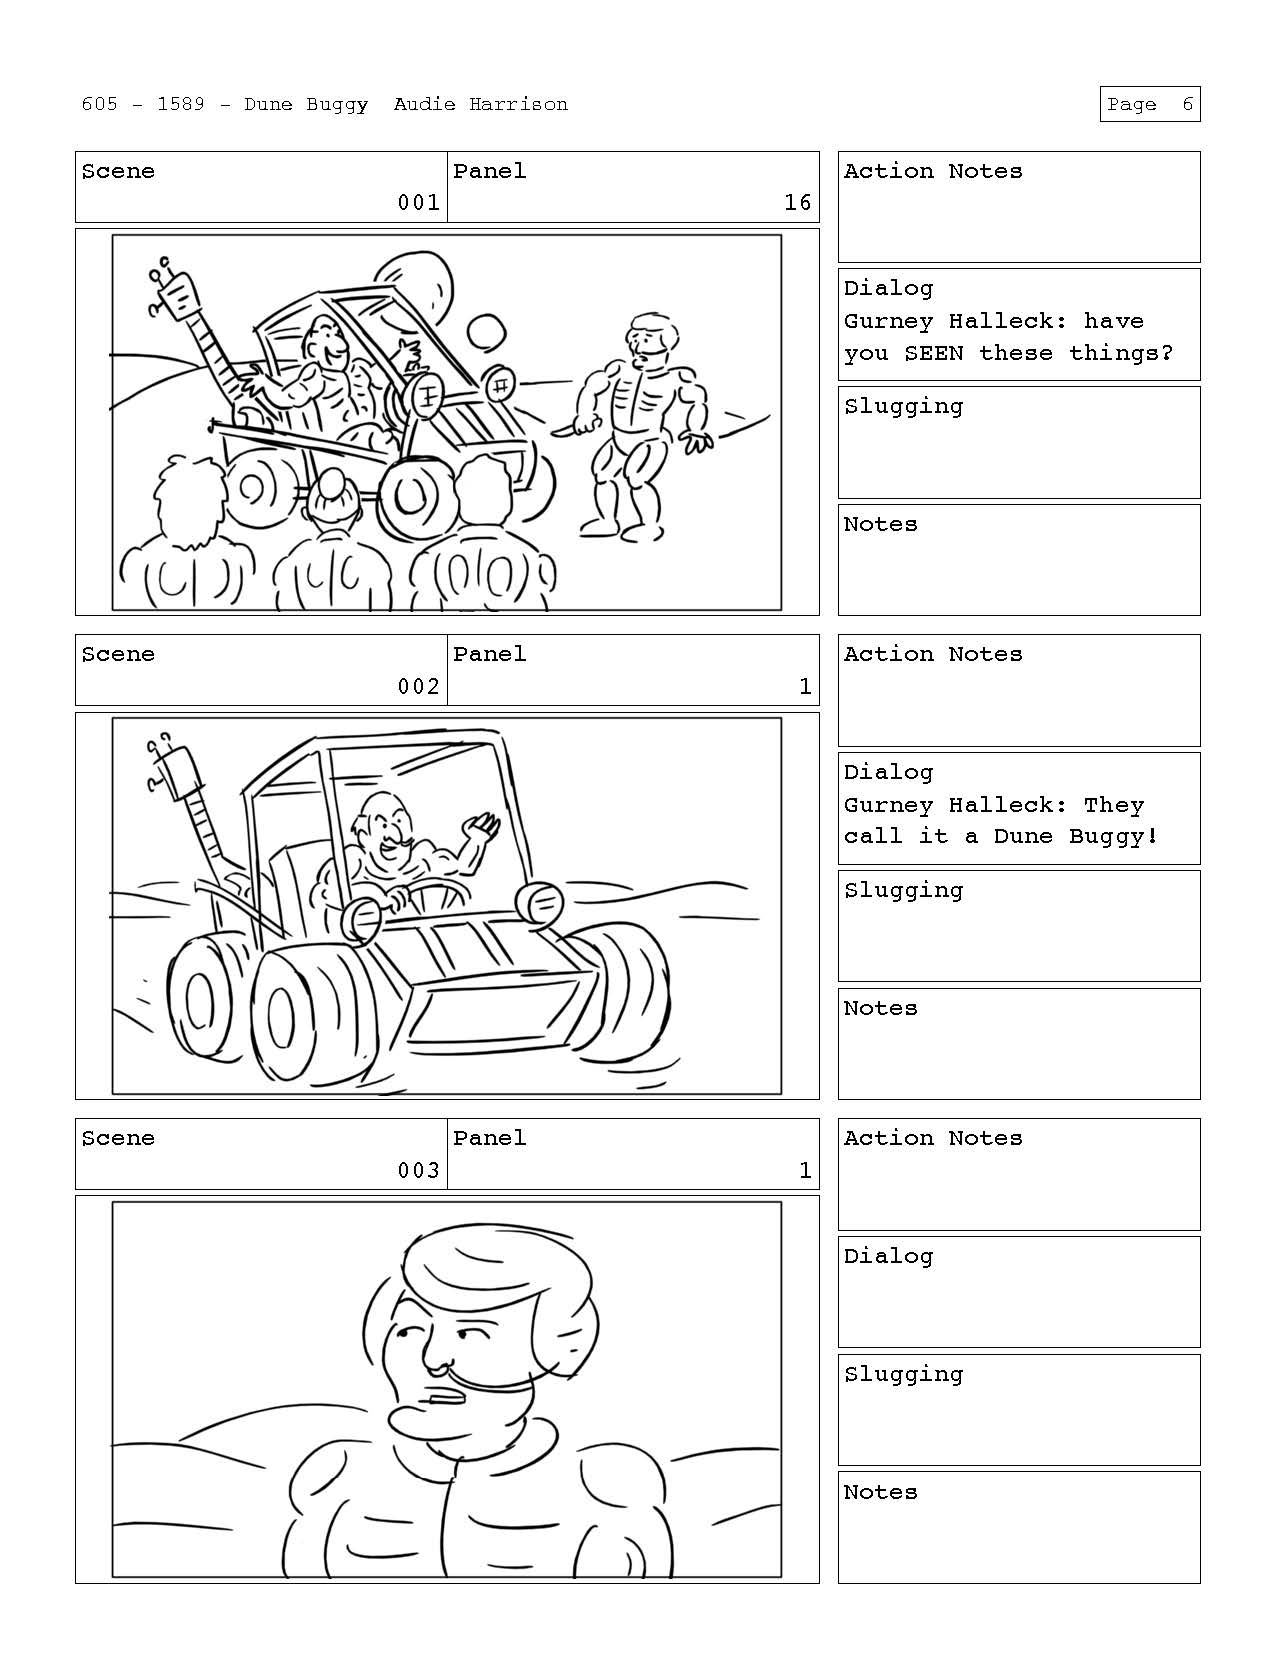 Dune_Buggy_Page_07.jpg